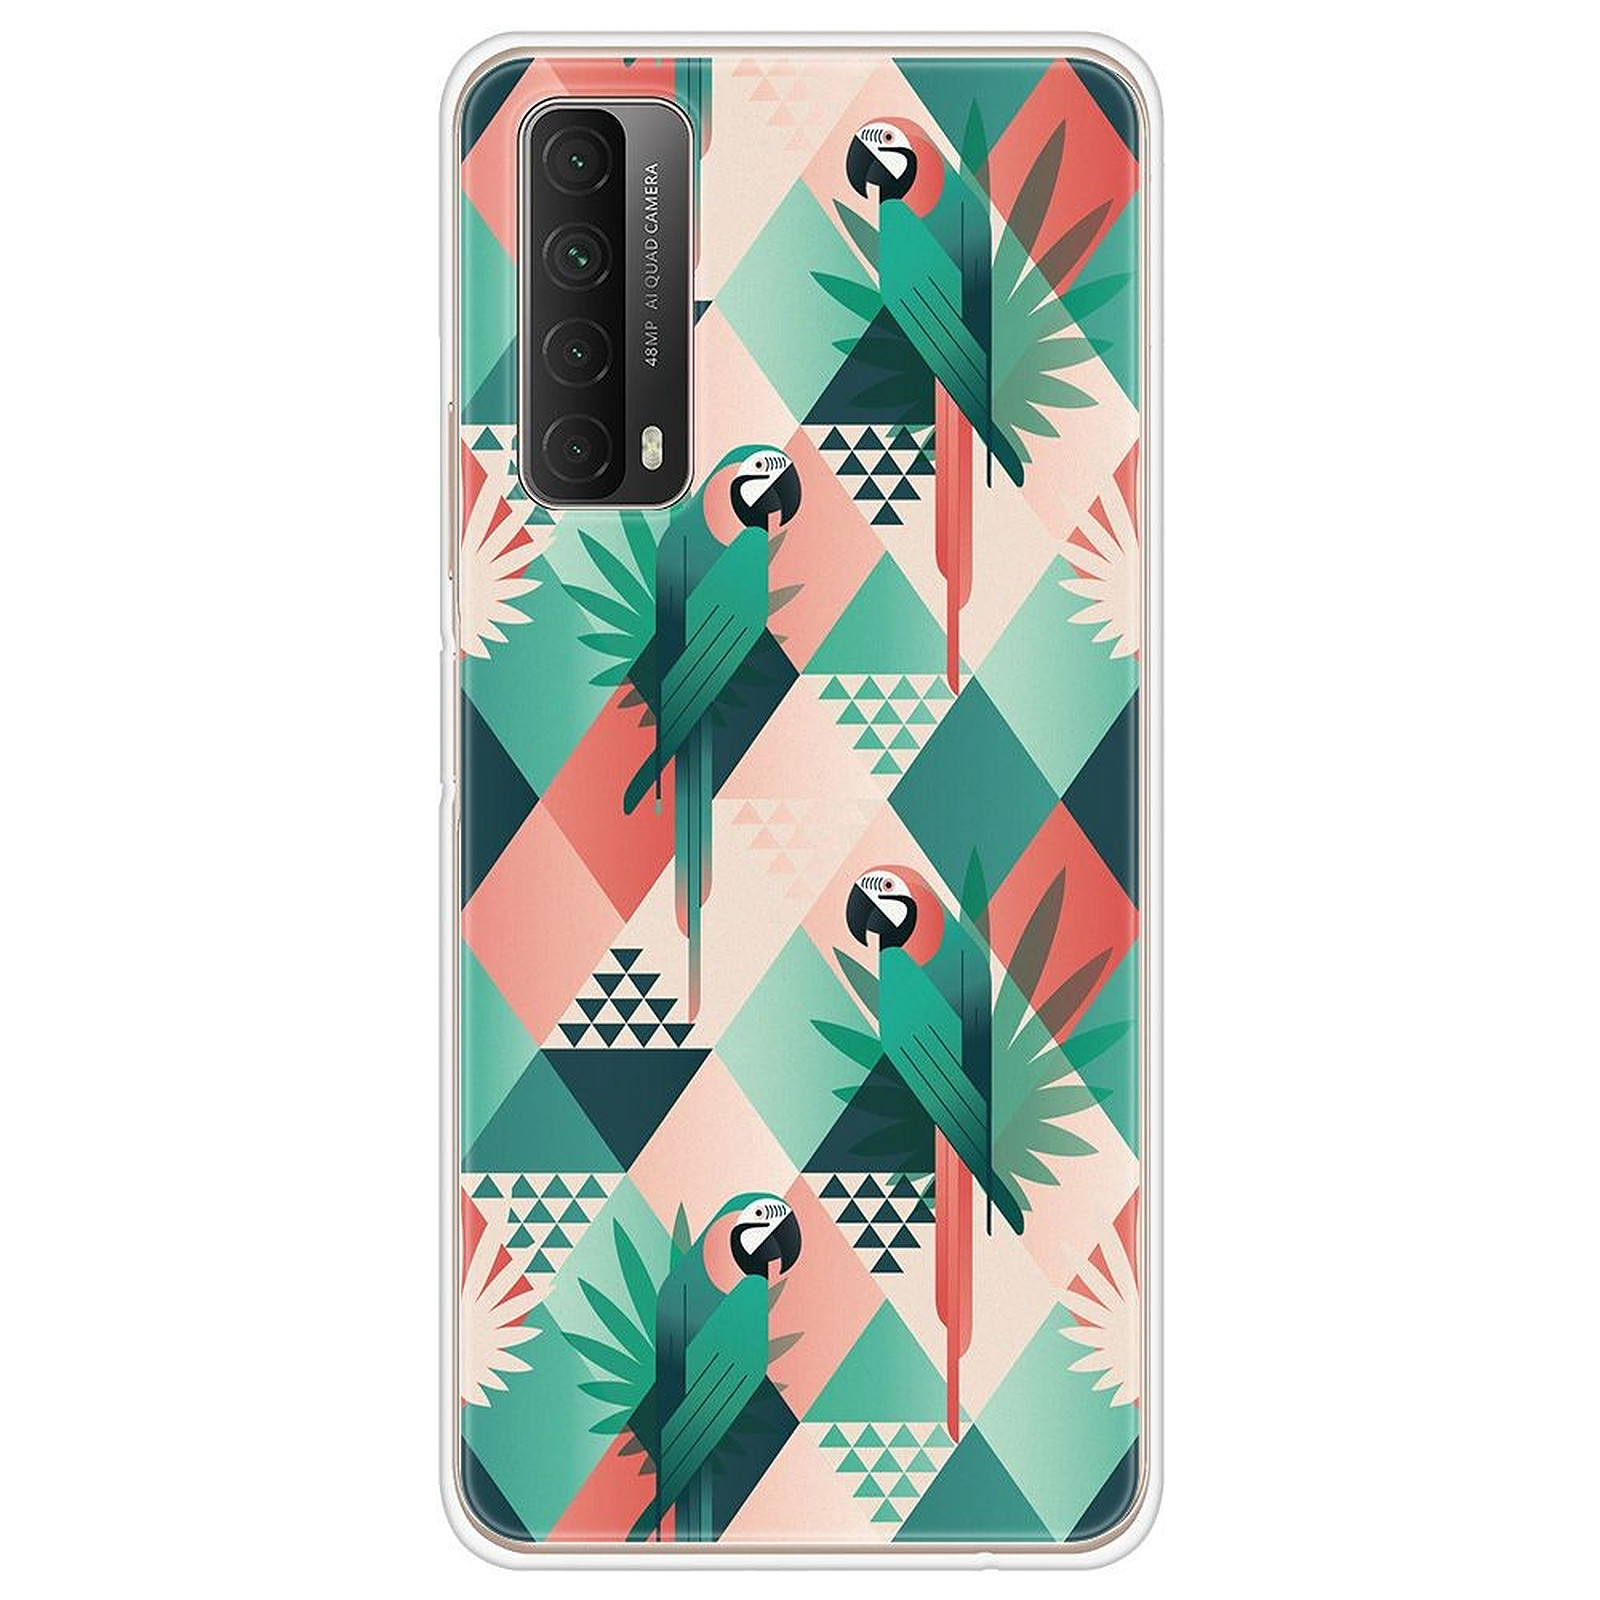 1001 Coques Coque silicone gel Huawei P Smart 2021 motif Perroquet ge´ome´trique - Coque telephone 1001Coques